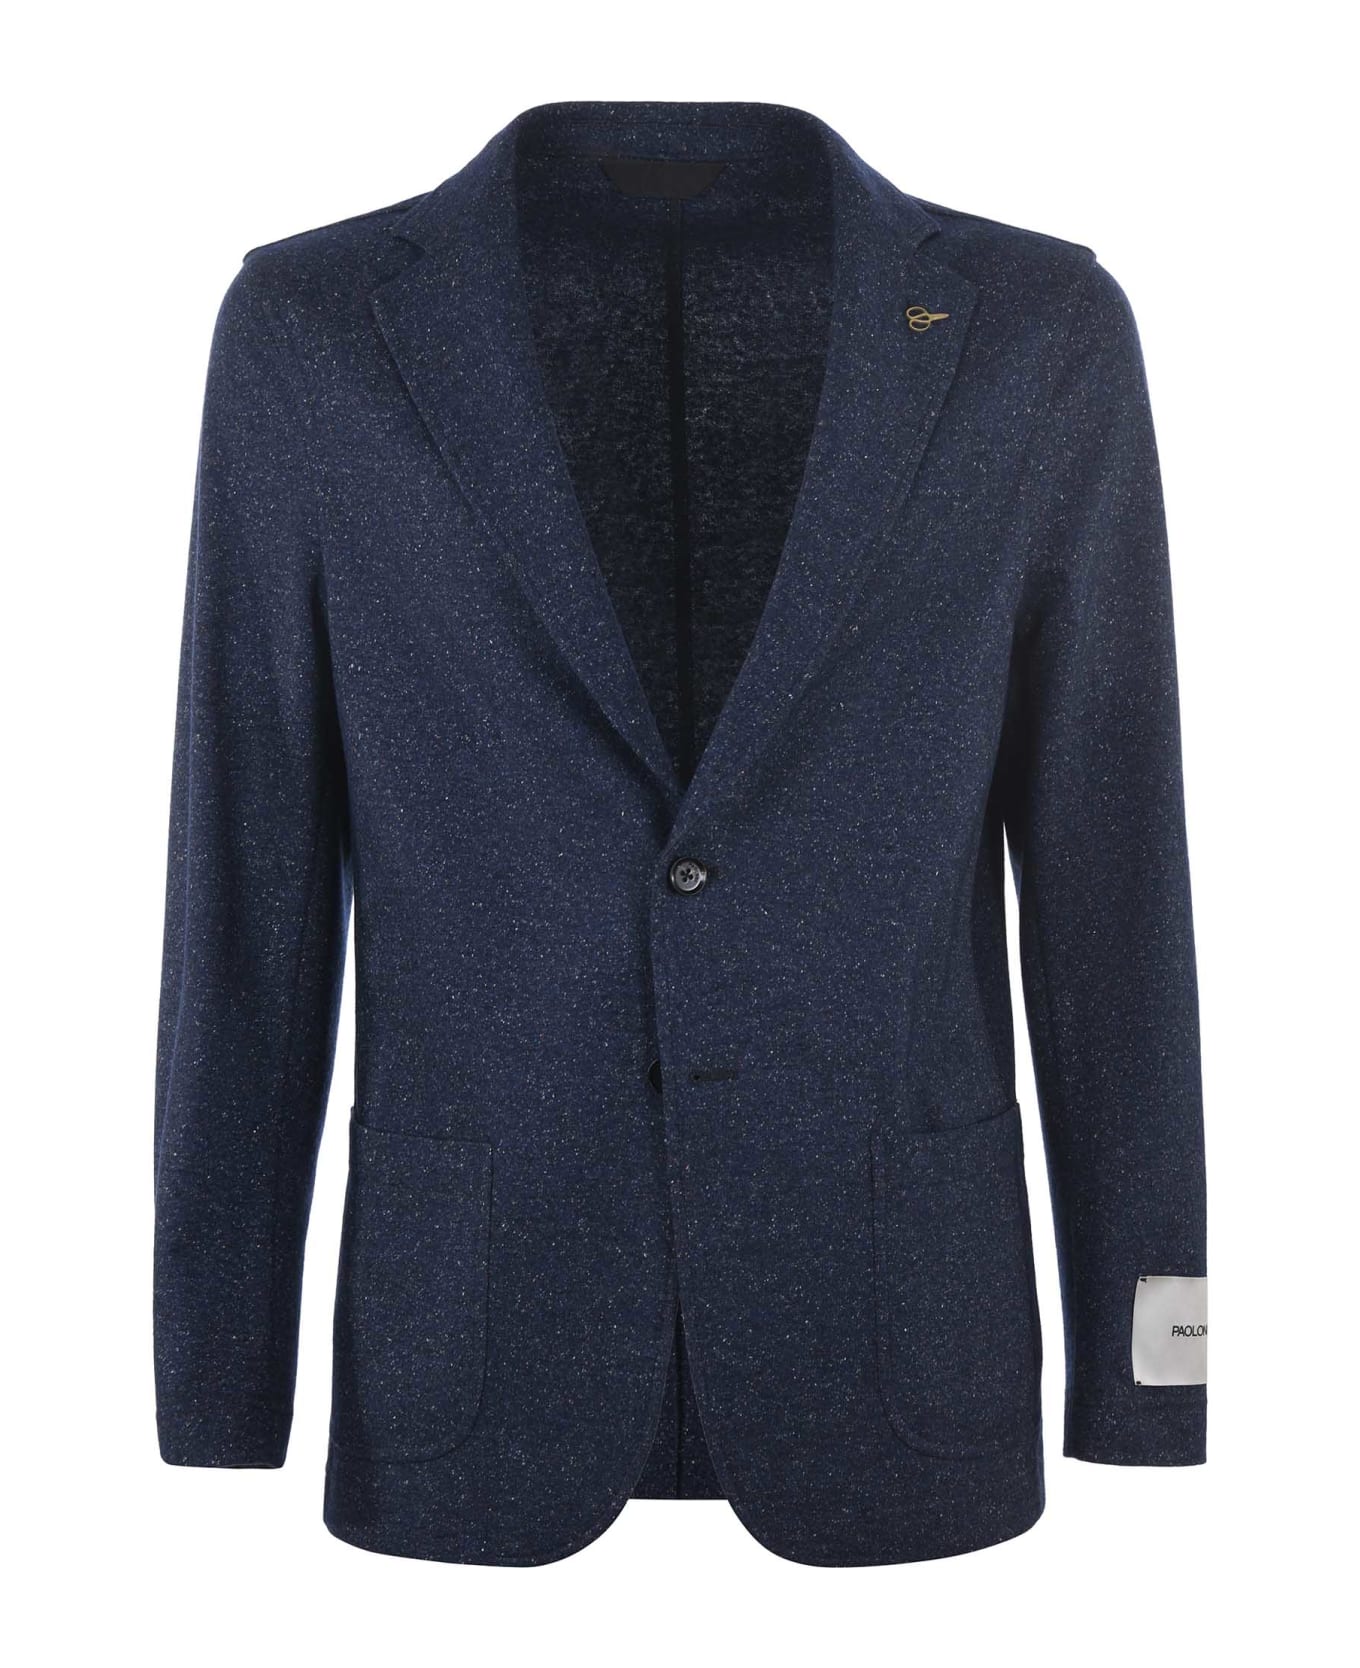 Paoloni Jacket In Knitted Wool And Silk - Blu melange